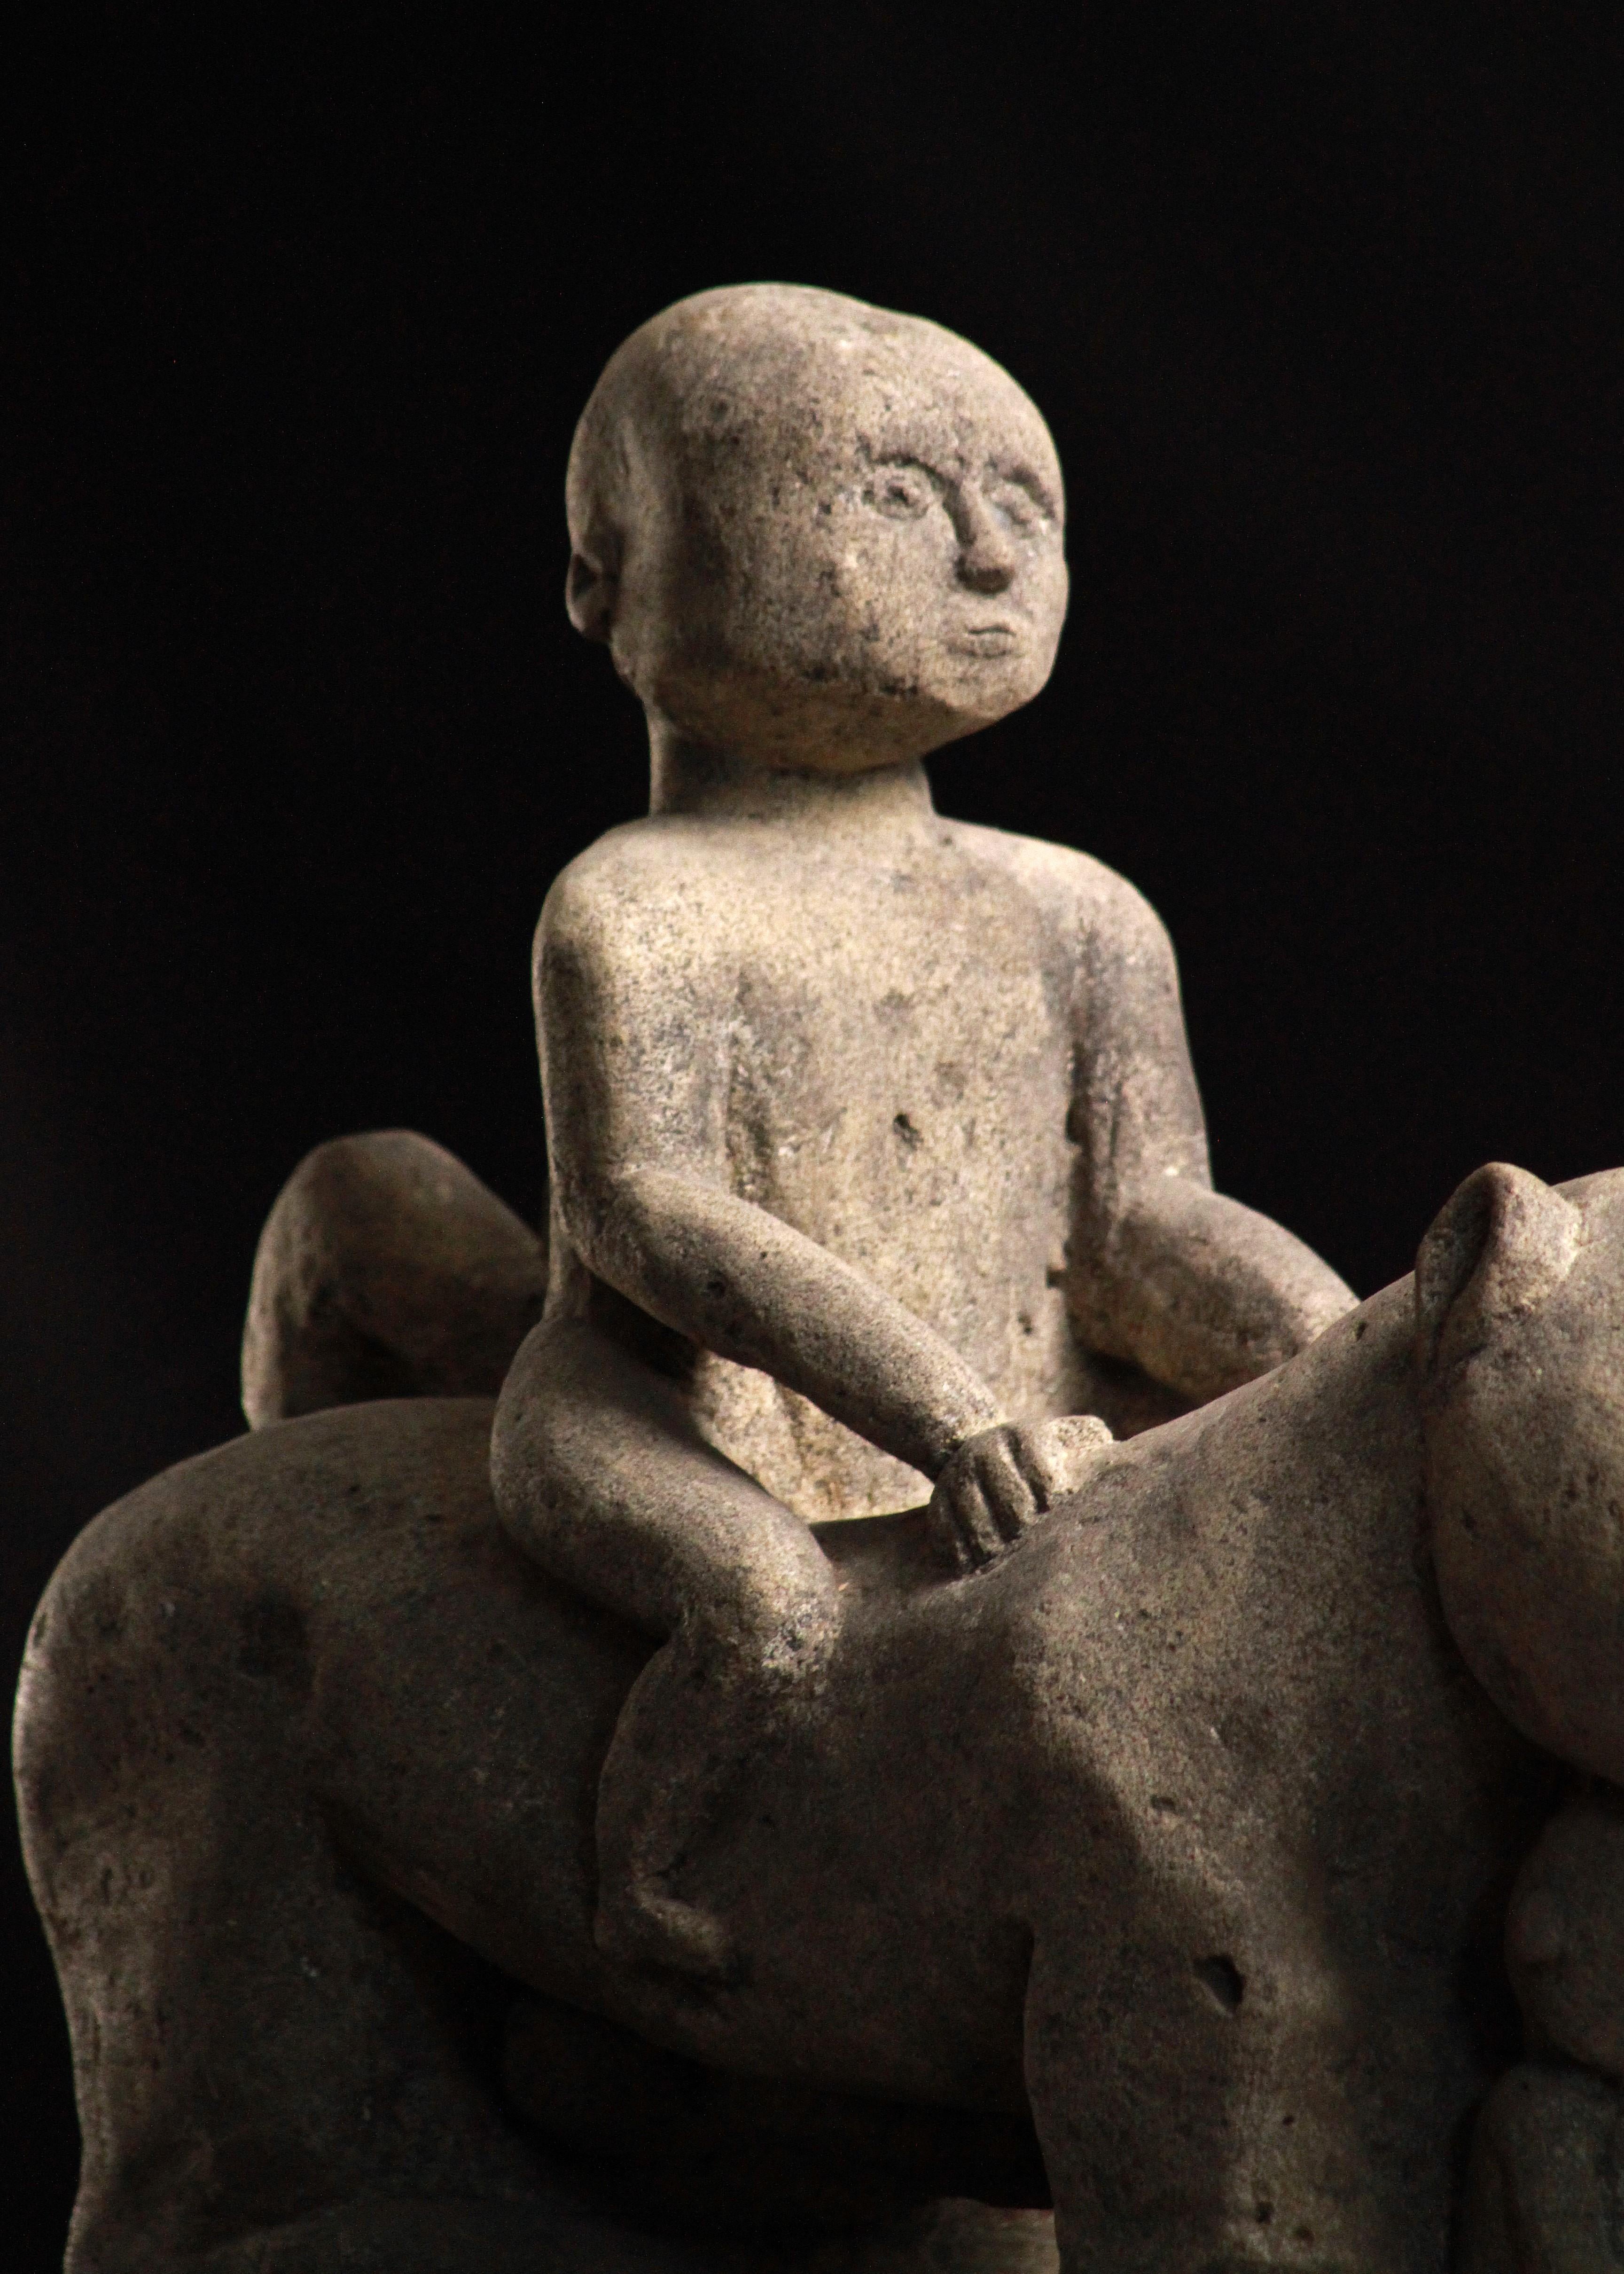 This remarkable stone sculpture hails from the Sunda Islands, a region rich in cultural diversity and artistic expression. Crafted by the Atoni ethnic group, this piece stands as a testament to their profound connection with both the material world